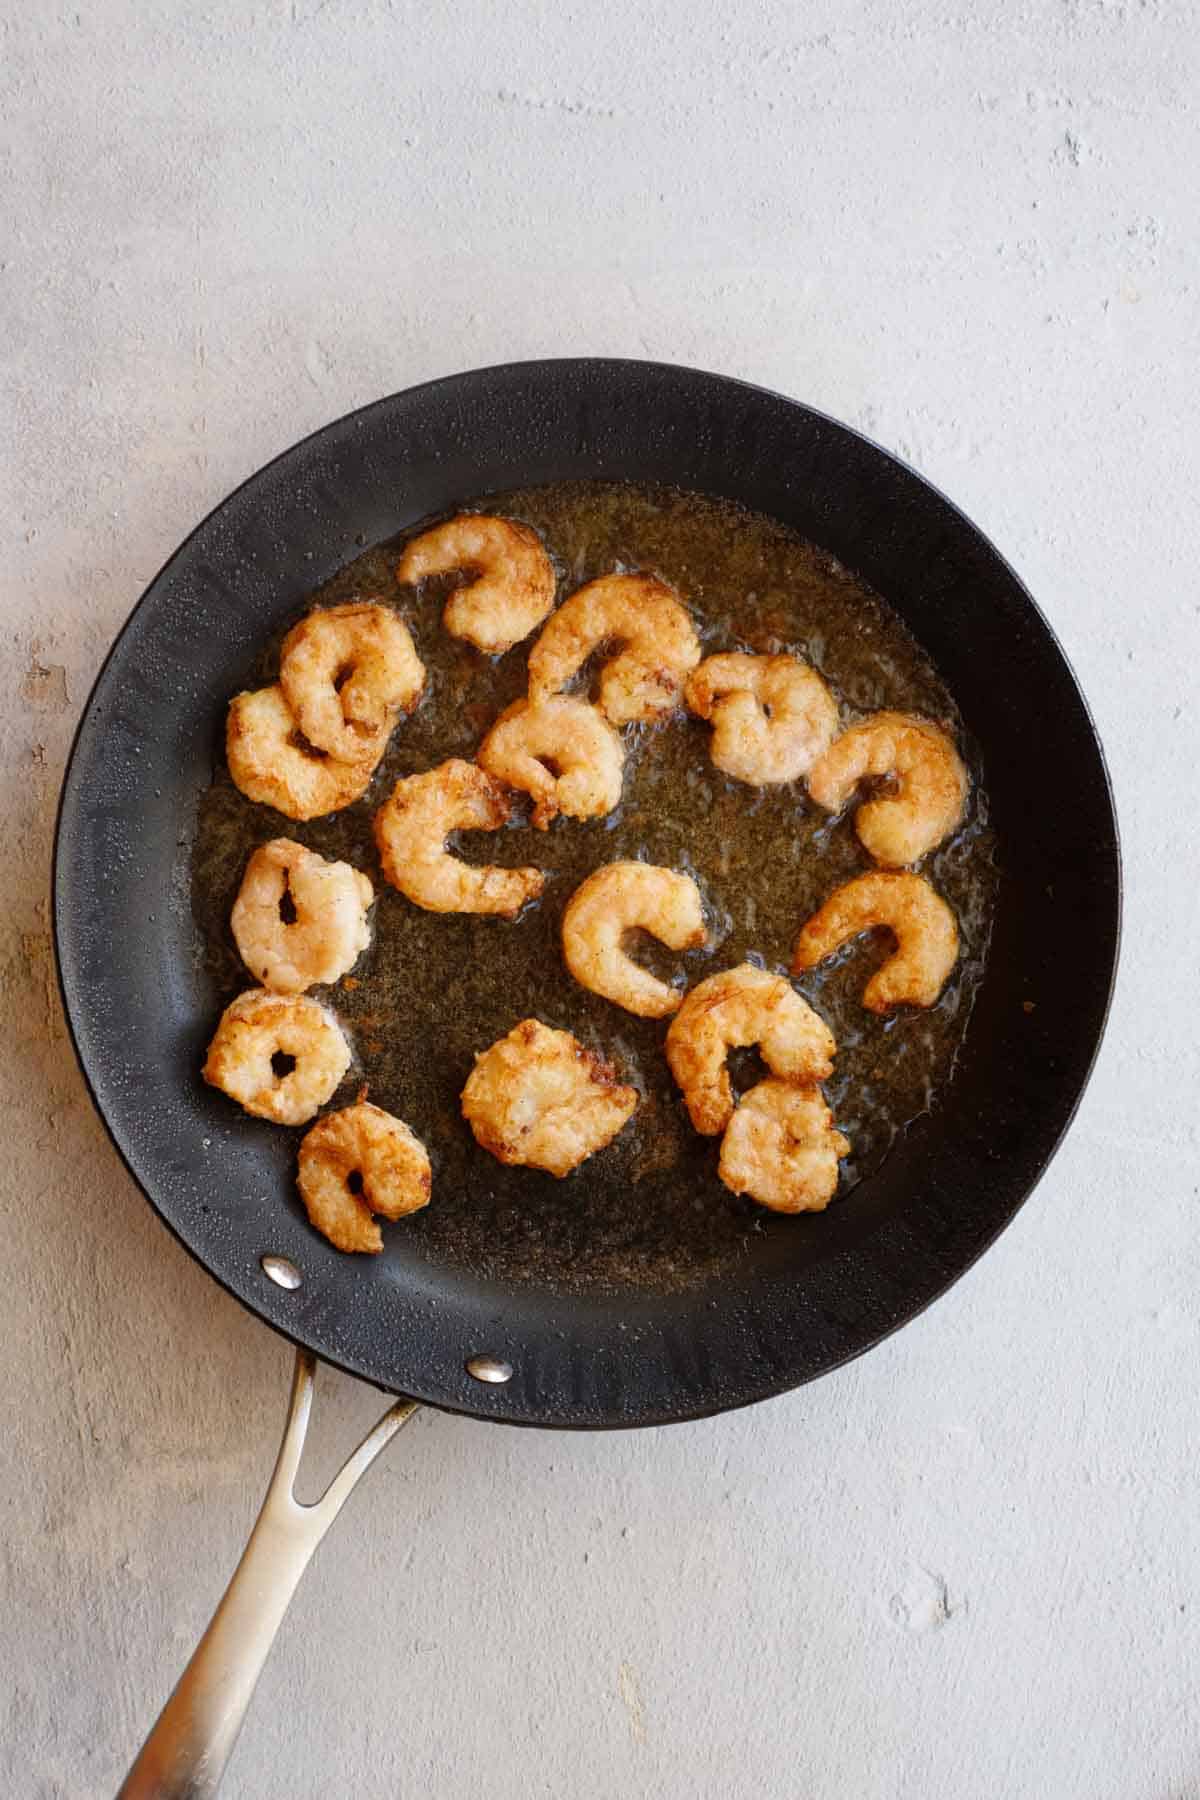 The shrimp cooking in a frying pan.